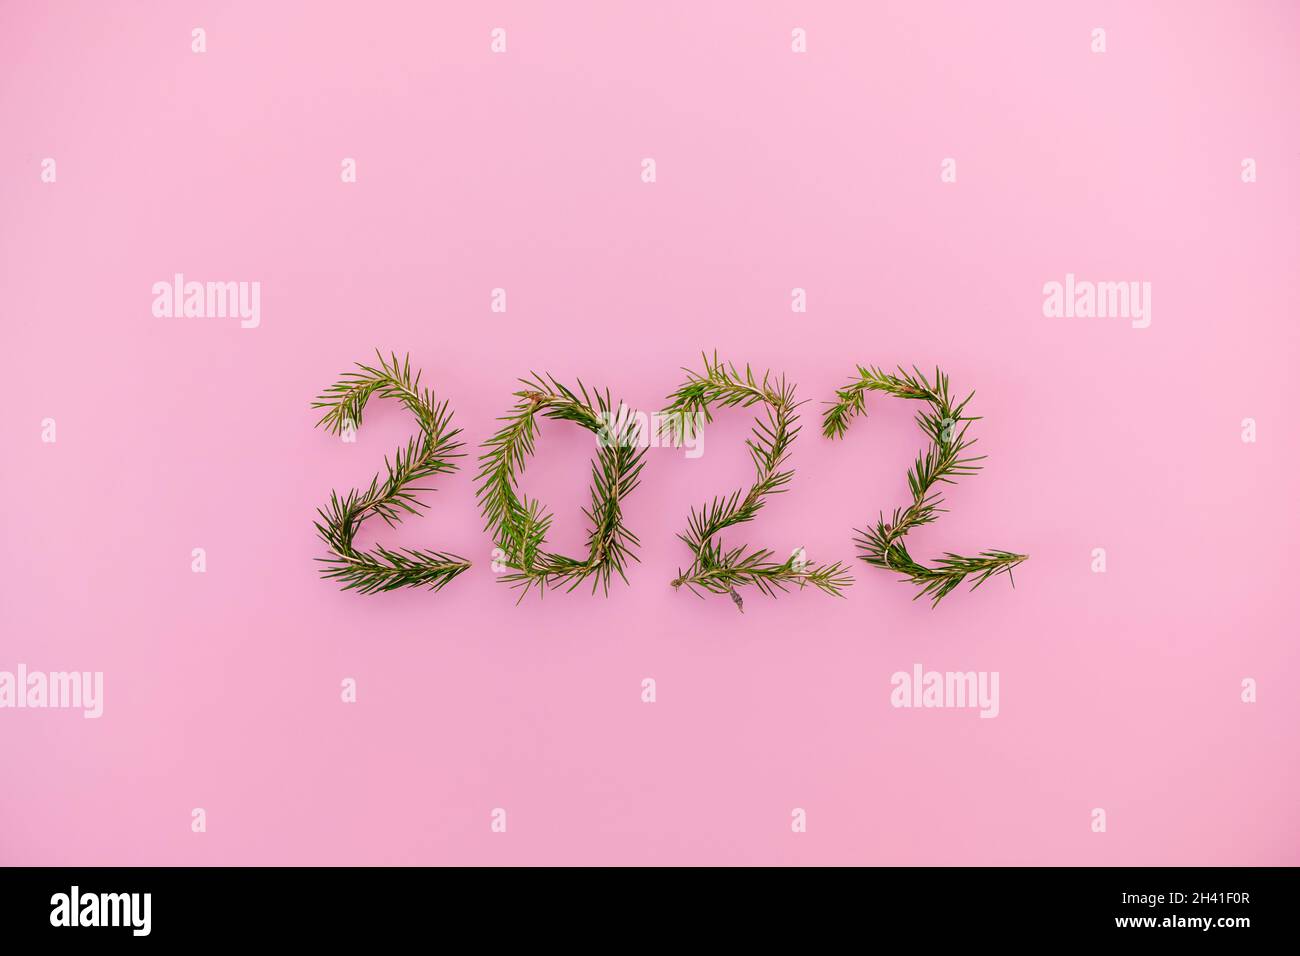 Lightbox with 2022 numbers handmade from Christmas tree branches. Stock Photo